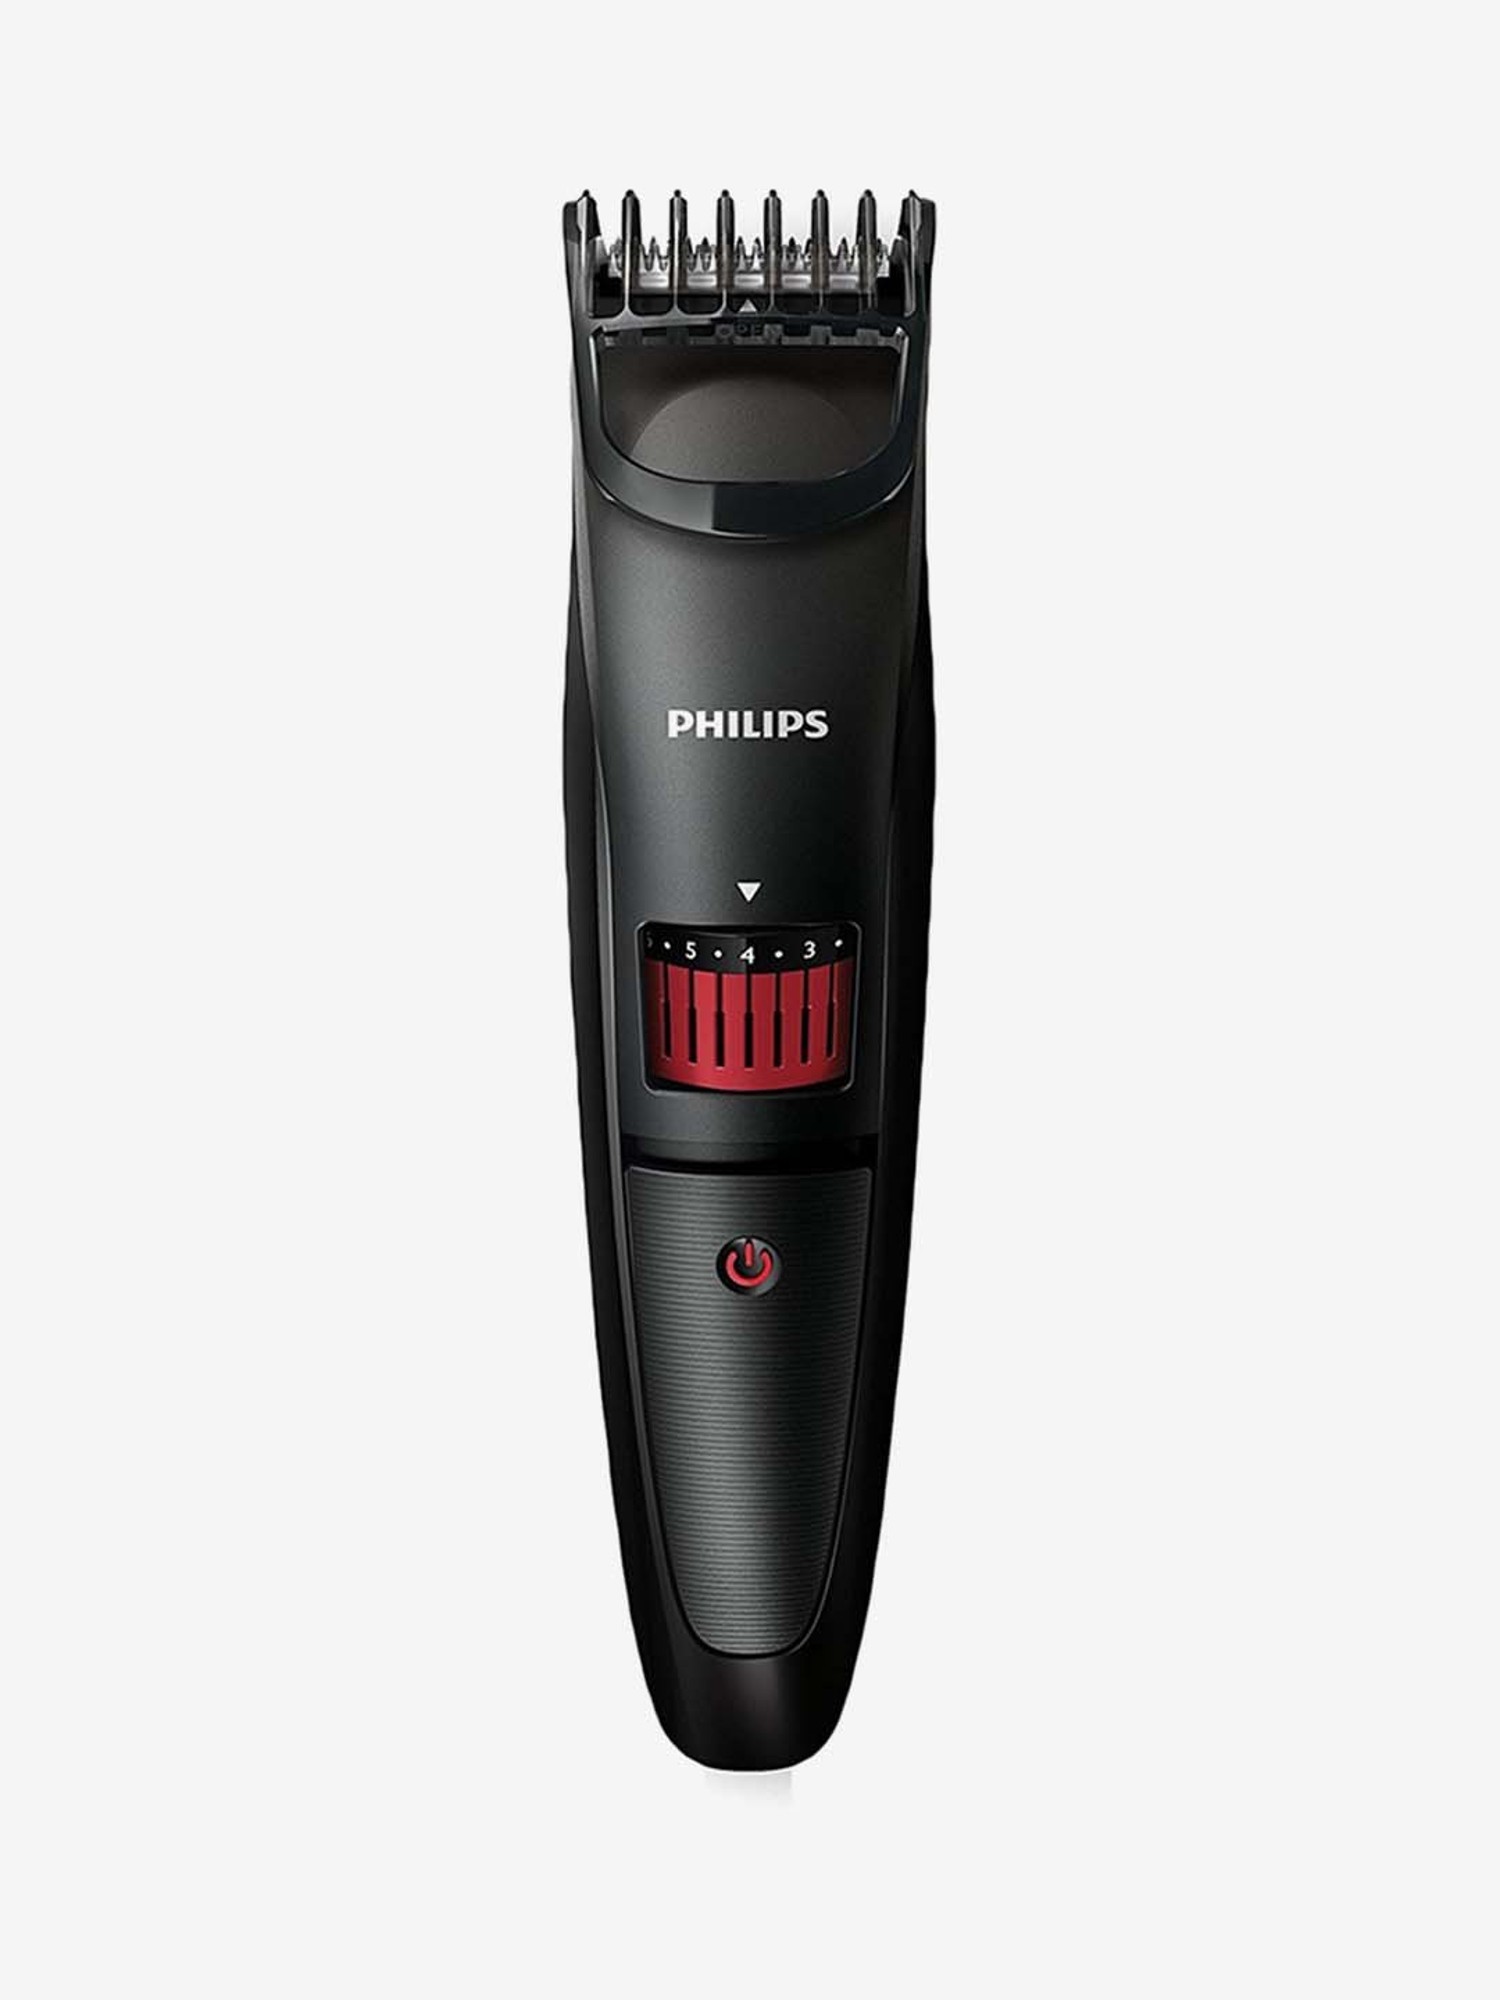 philips qt4005 trimmer blade